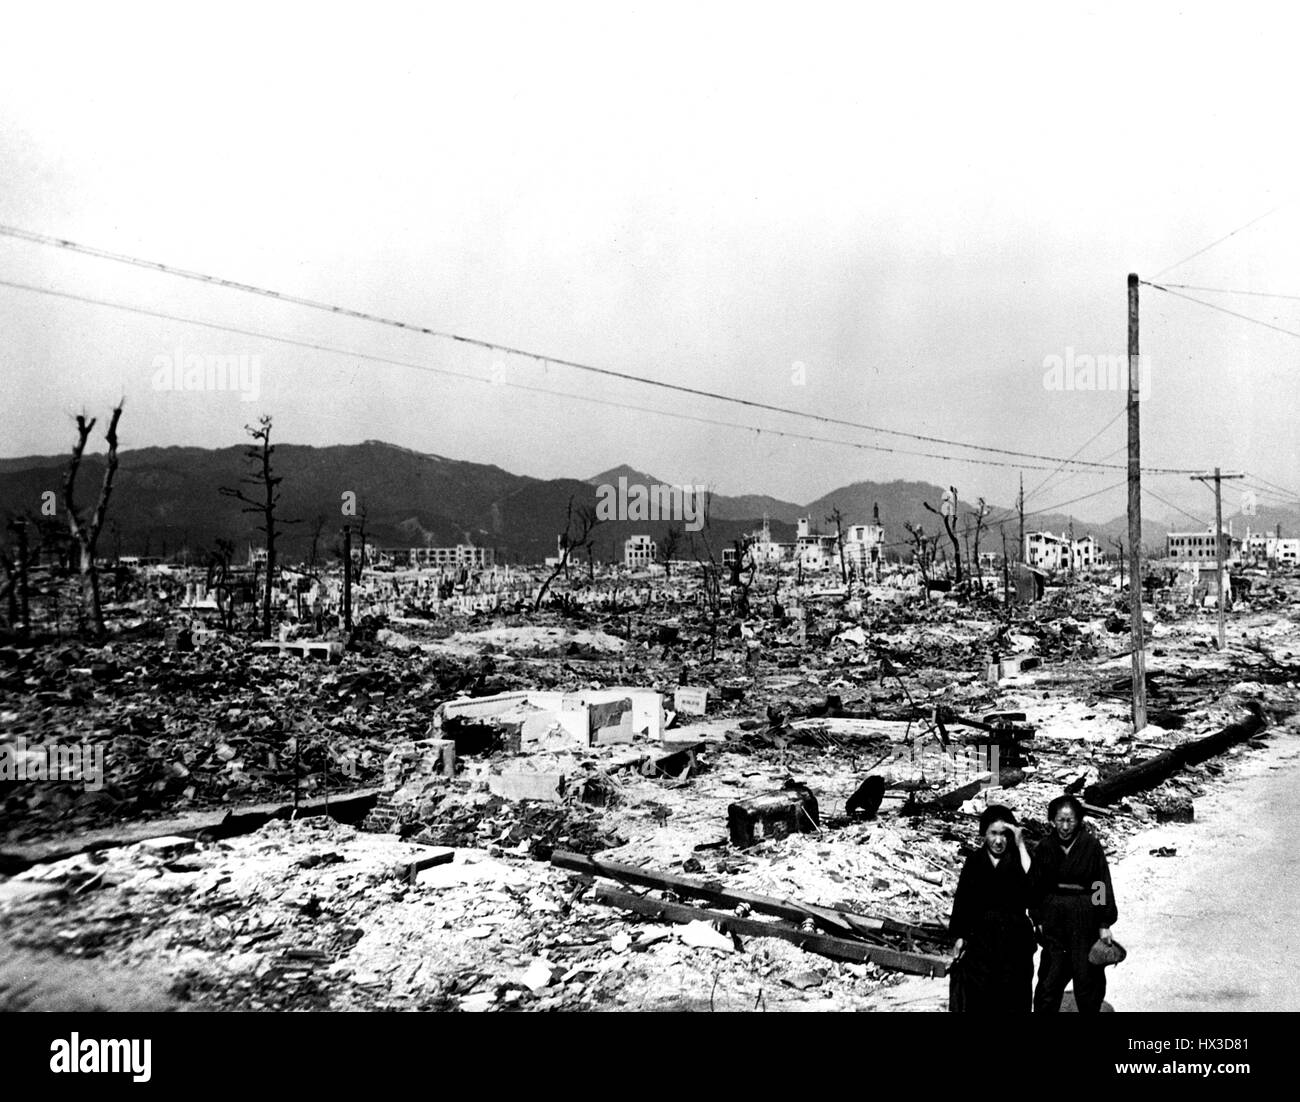 Desolation and dilapidated structures following the atomic bombing of Hiroshima, Japan, November, 1945. Image courtesy US Department of Energy. Stock Photo